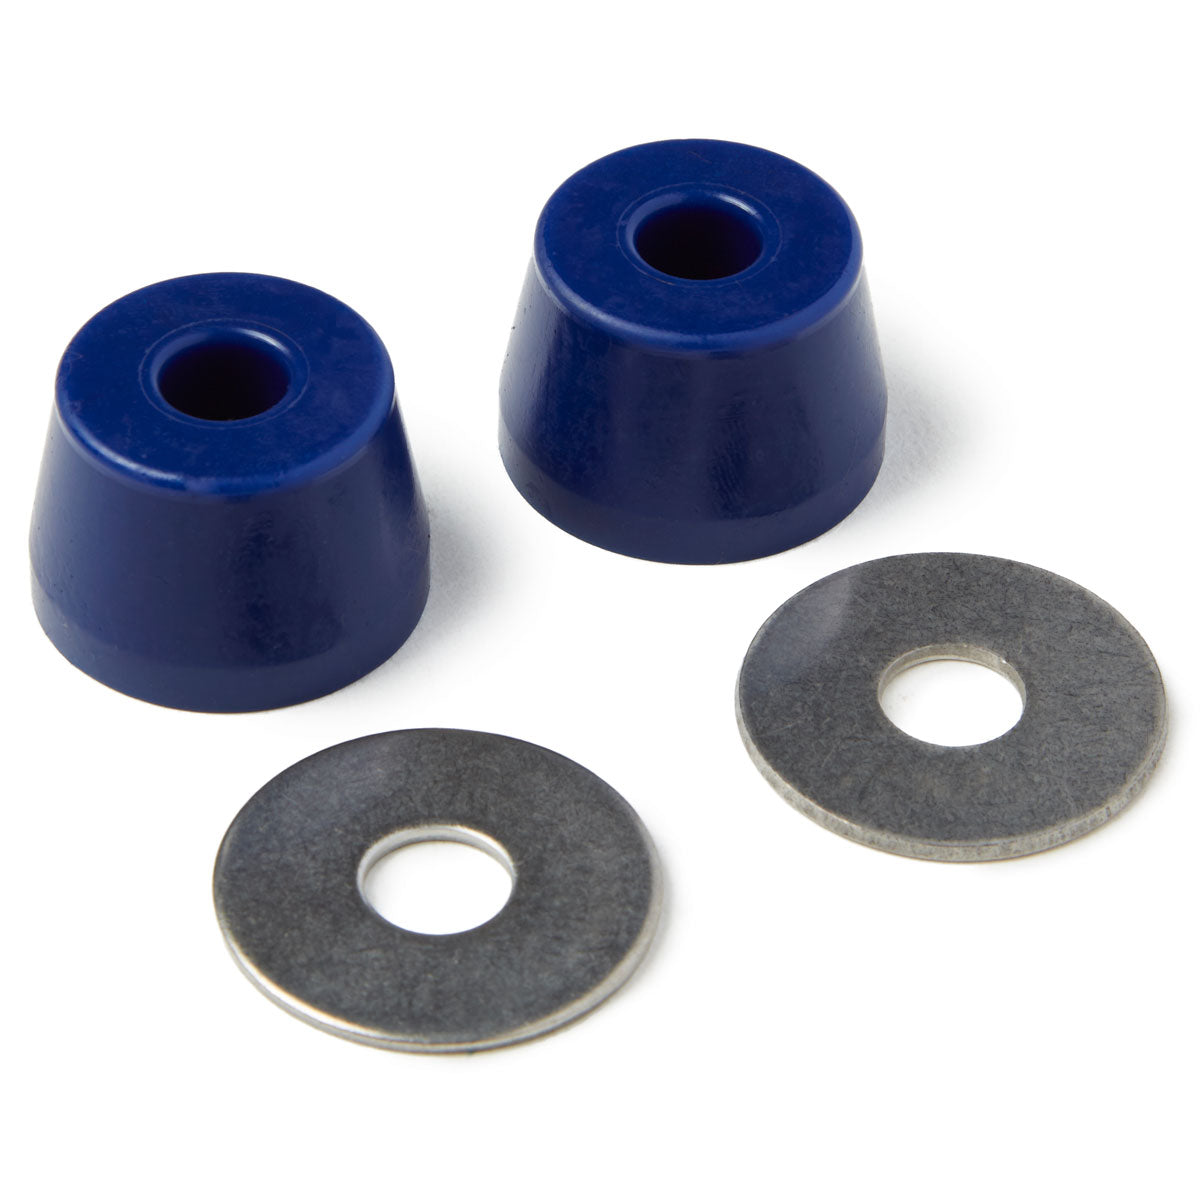 RipTide Tall Fat Cone Bushings - APS 92.5a image 1